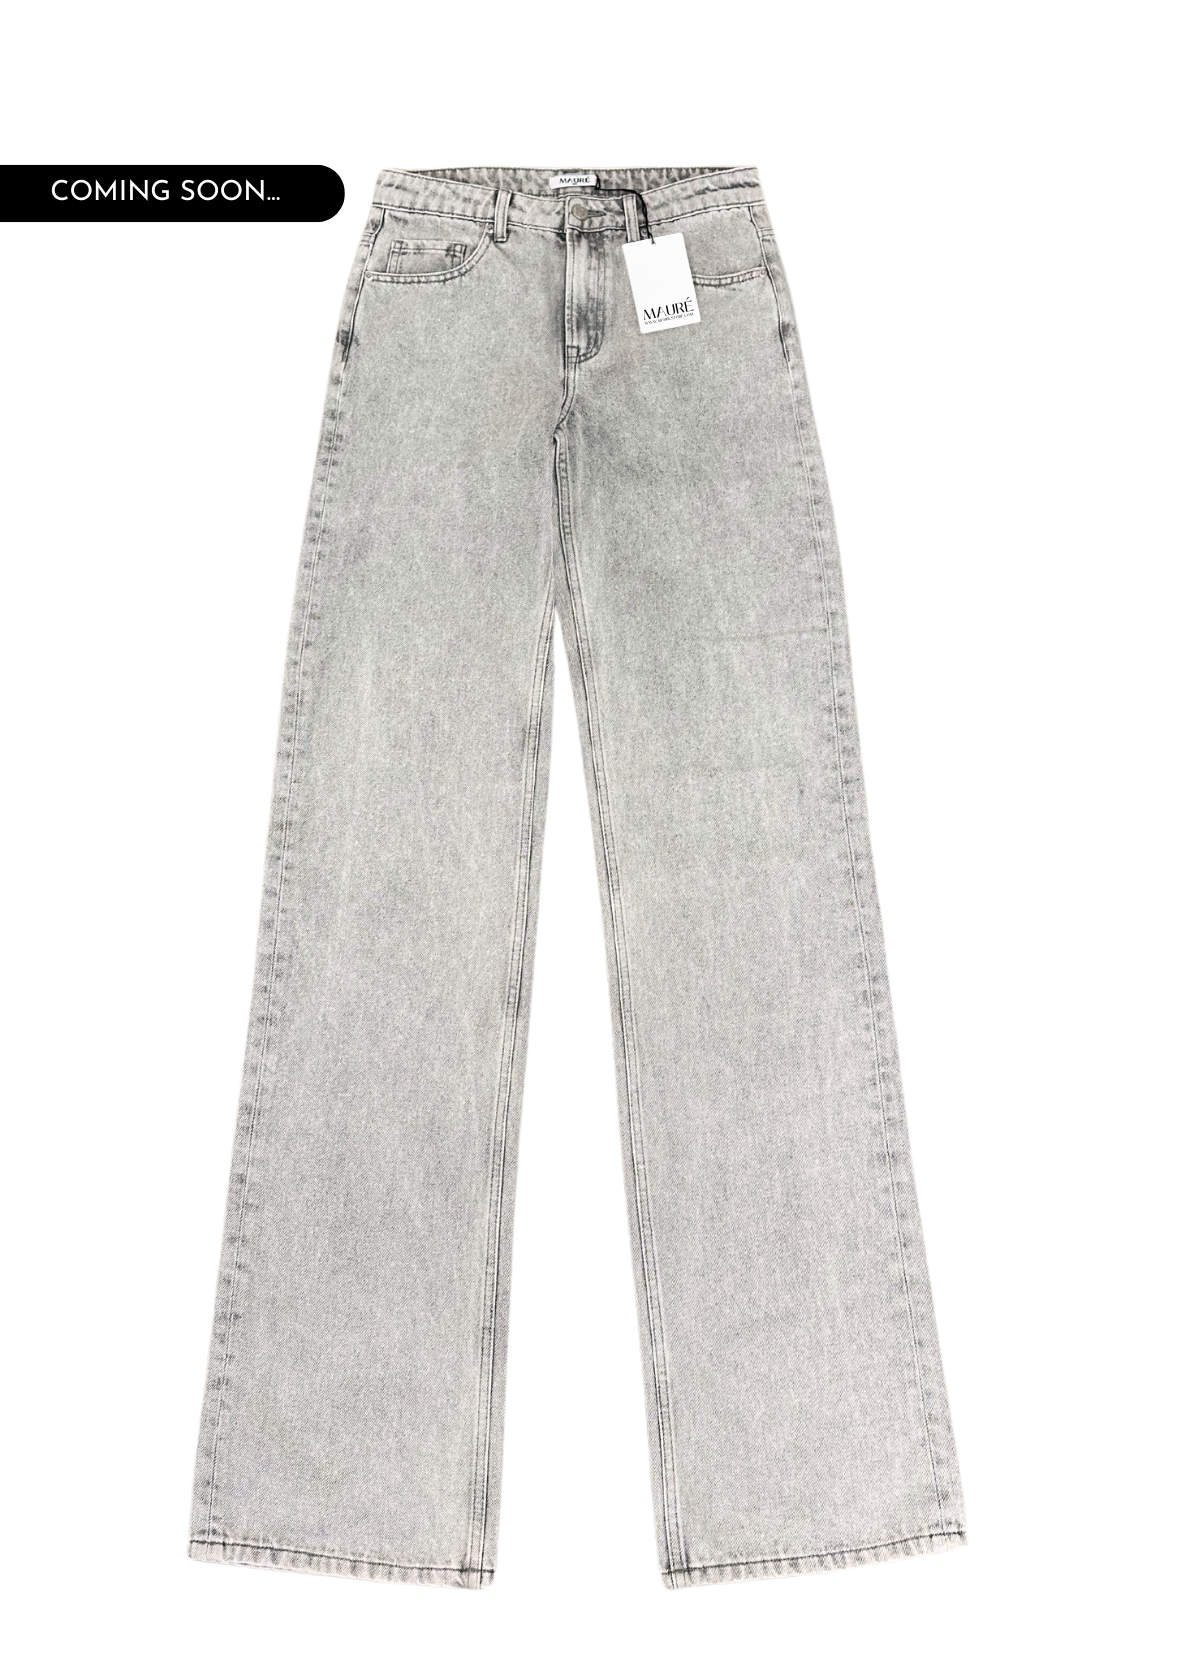 Low waist jeans light washed grey (TALL)